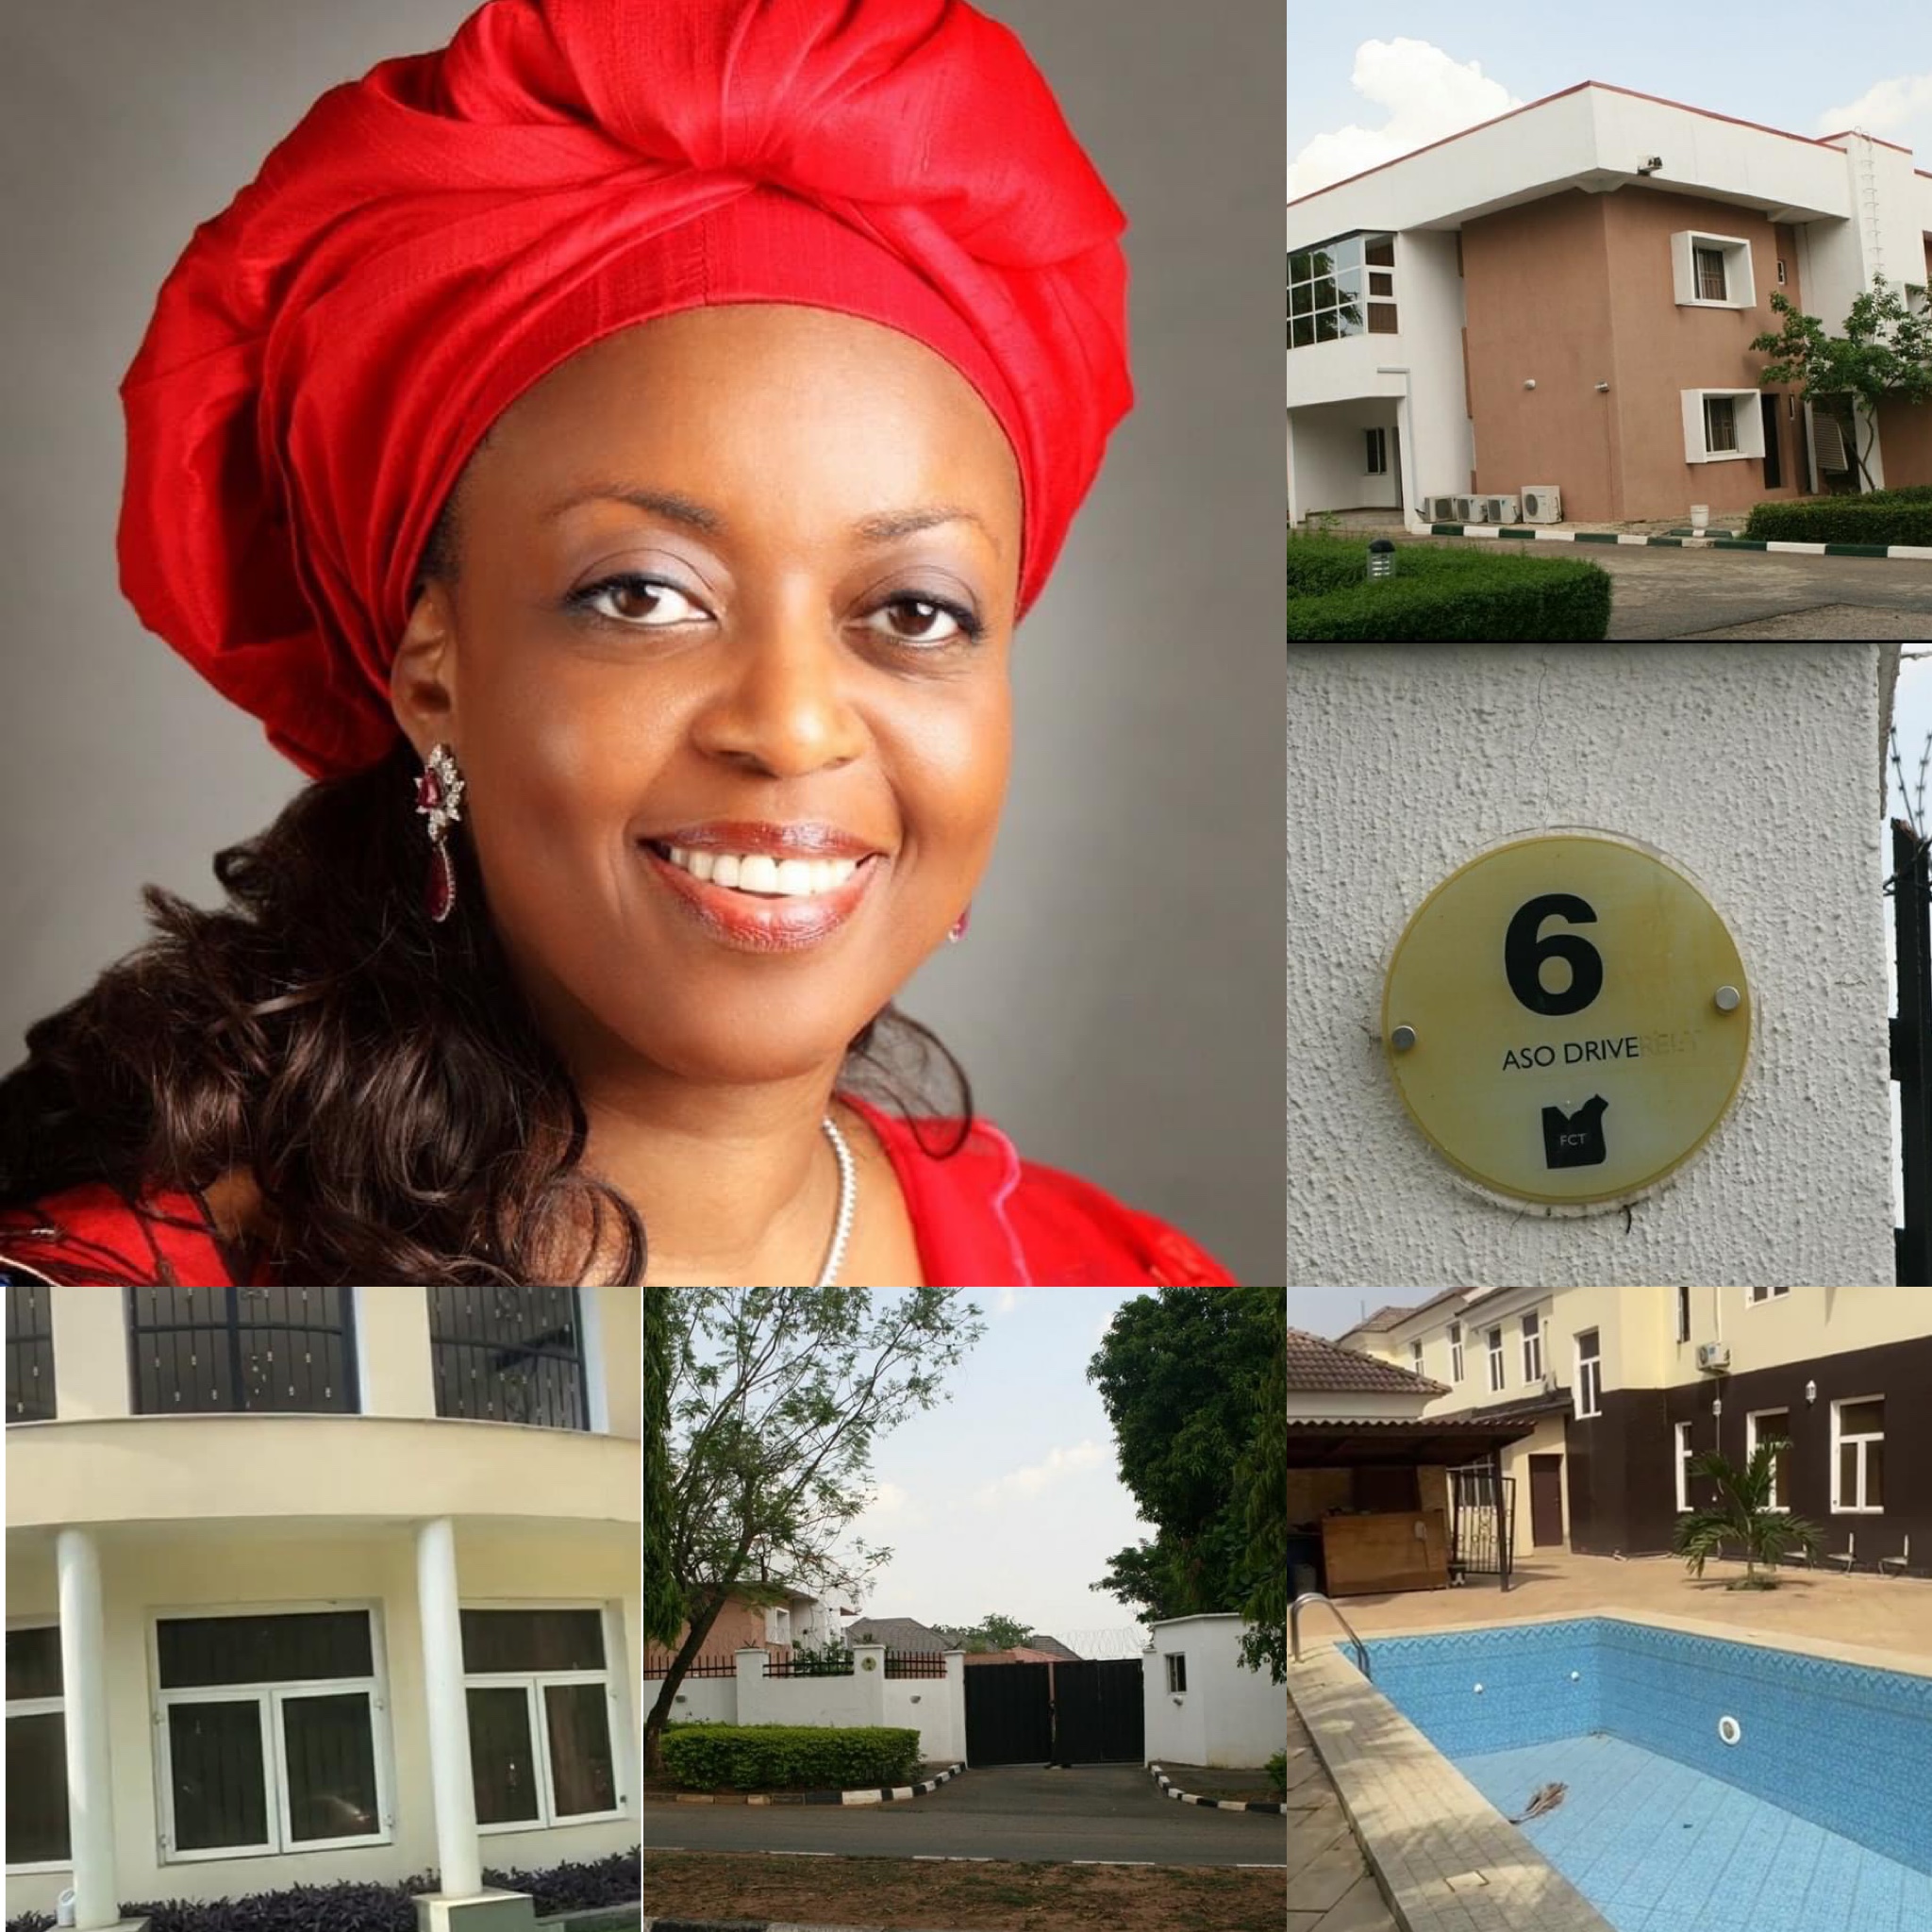 Court orders final forfeiture of Diezani’s Abuja homes, cars